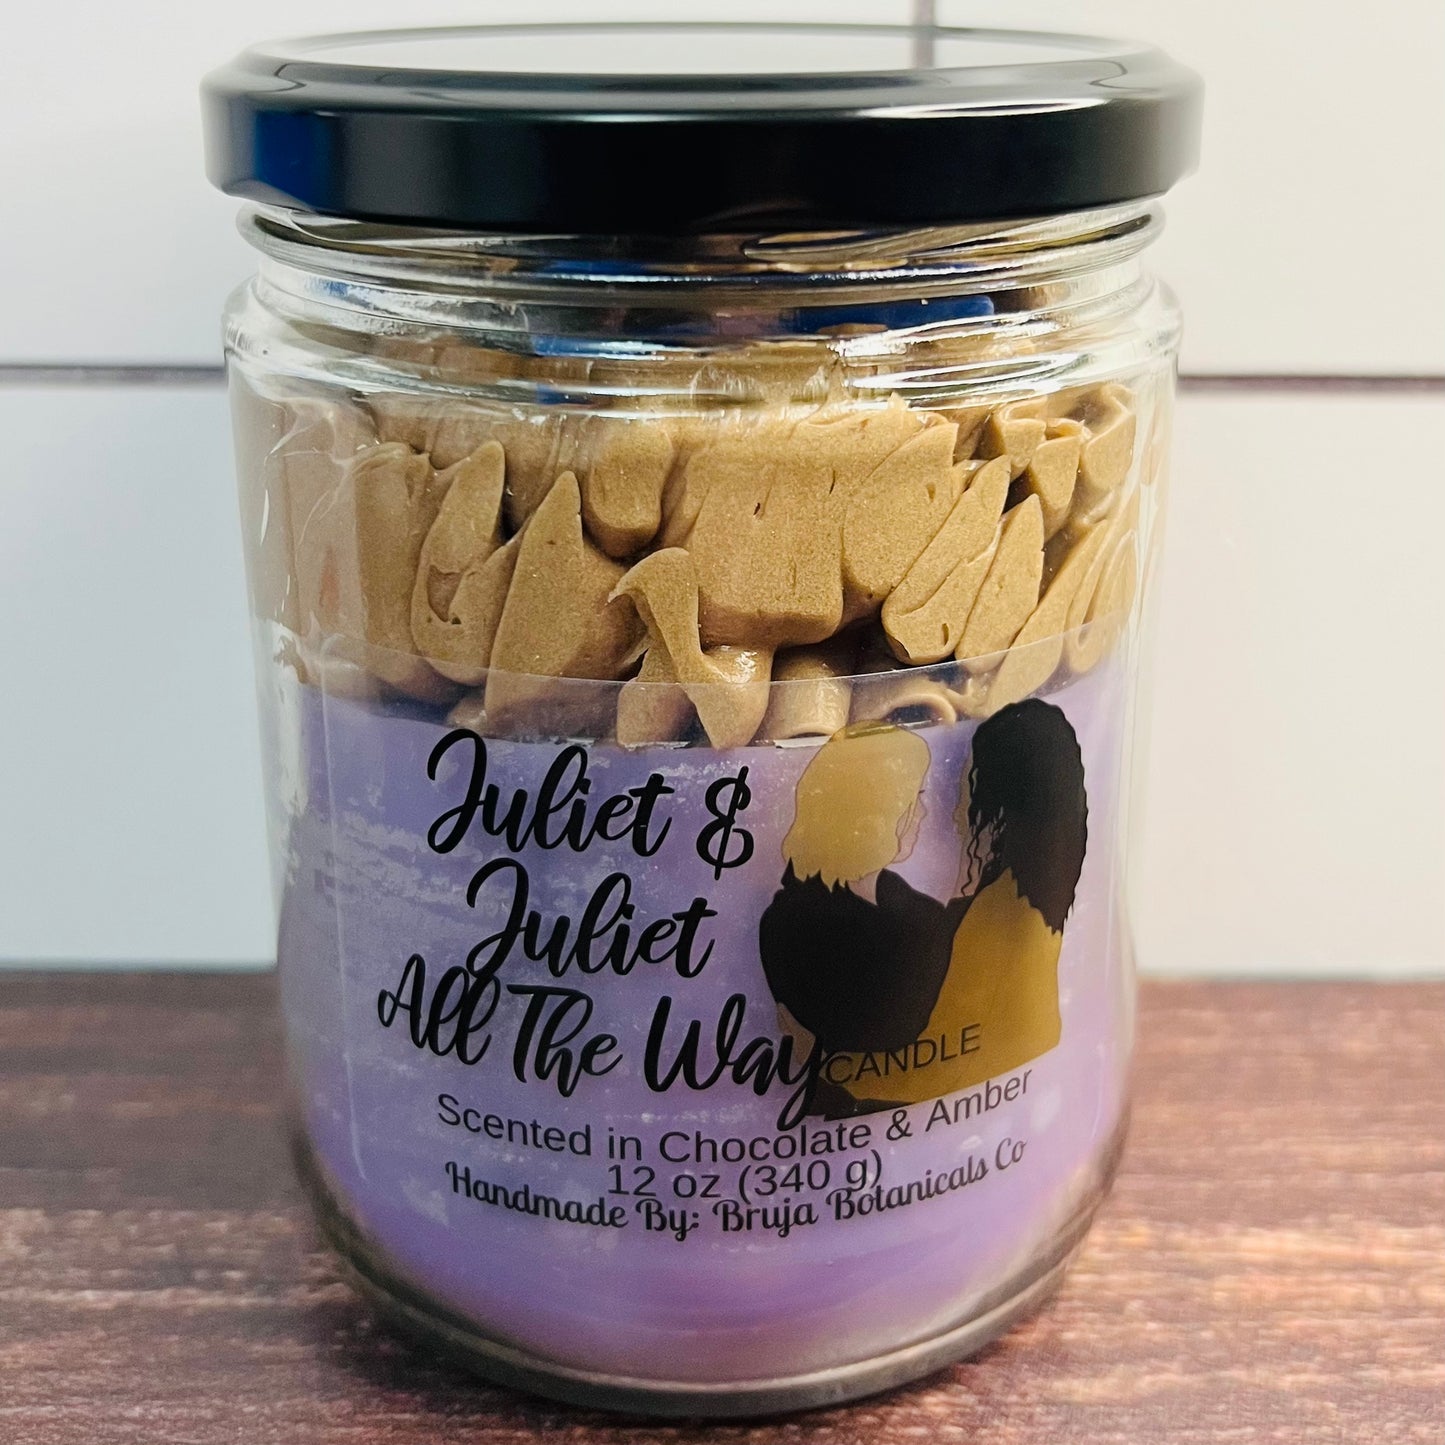 Juliet & Juliet All The Way Whipped Candle (TVD inspired)